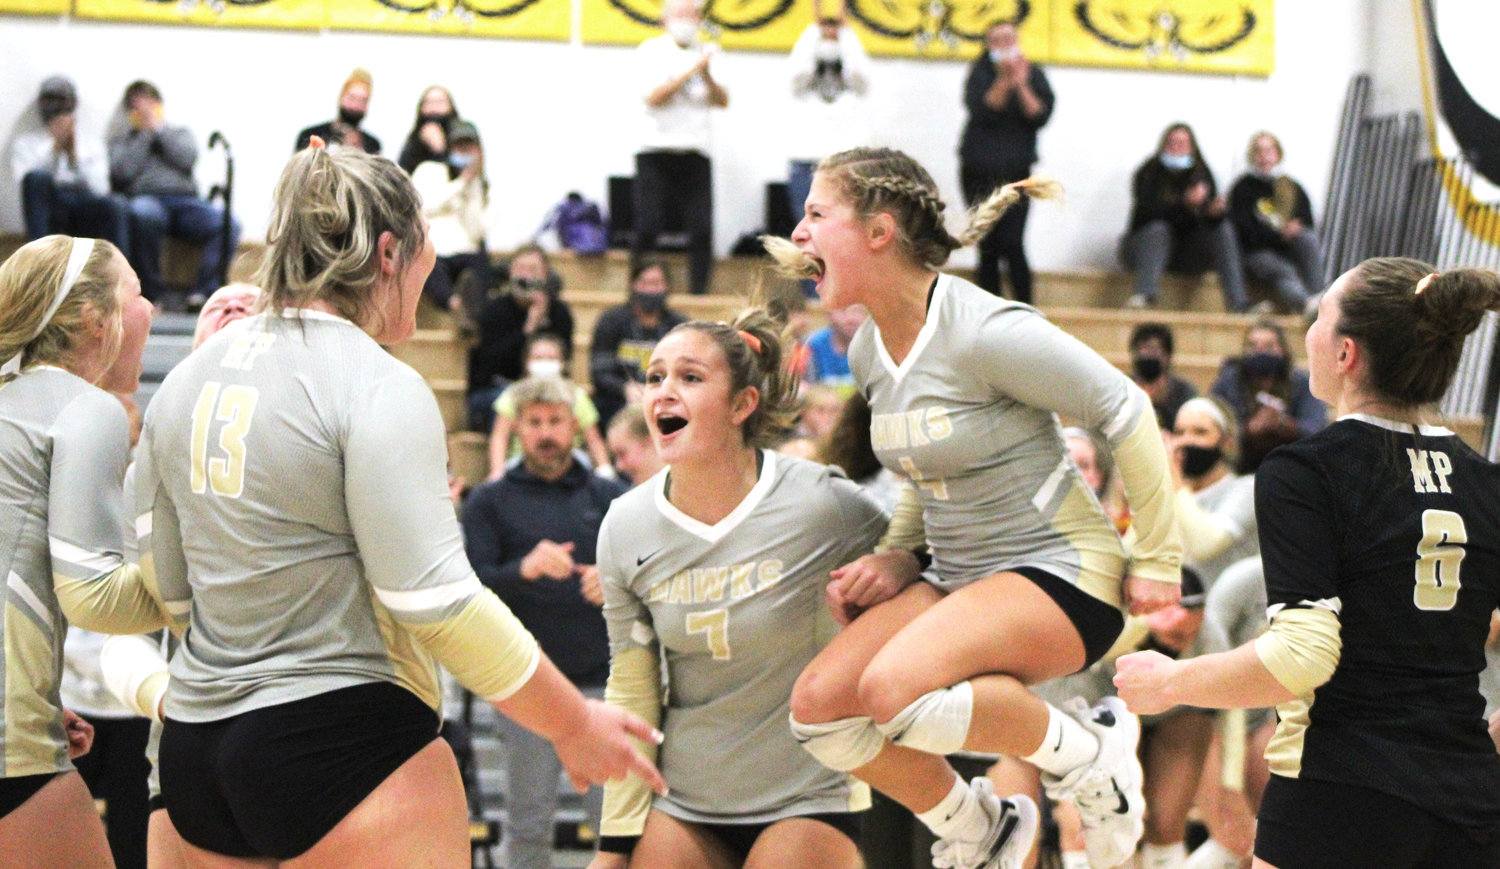 Members of the Mid-Prairie volleyball team, including seniors Maddie Edgington (right), Paige Peiffer (7), Tori Boyse (13) and Phelan Hostetler (left), celebrate their River Valley Tournament win over Tipton.